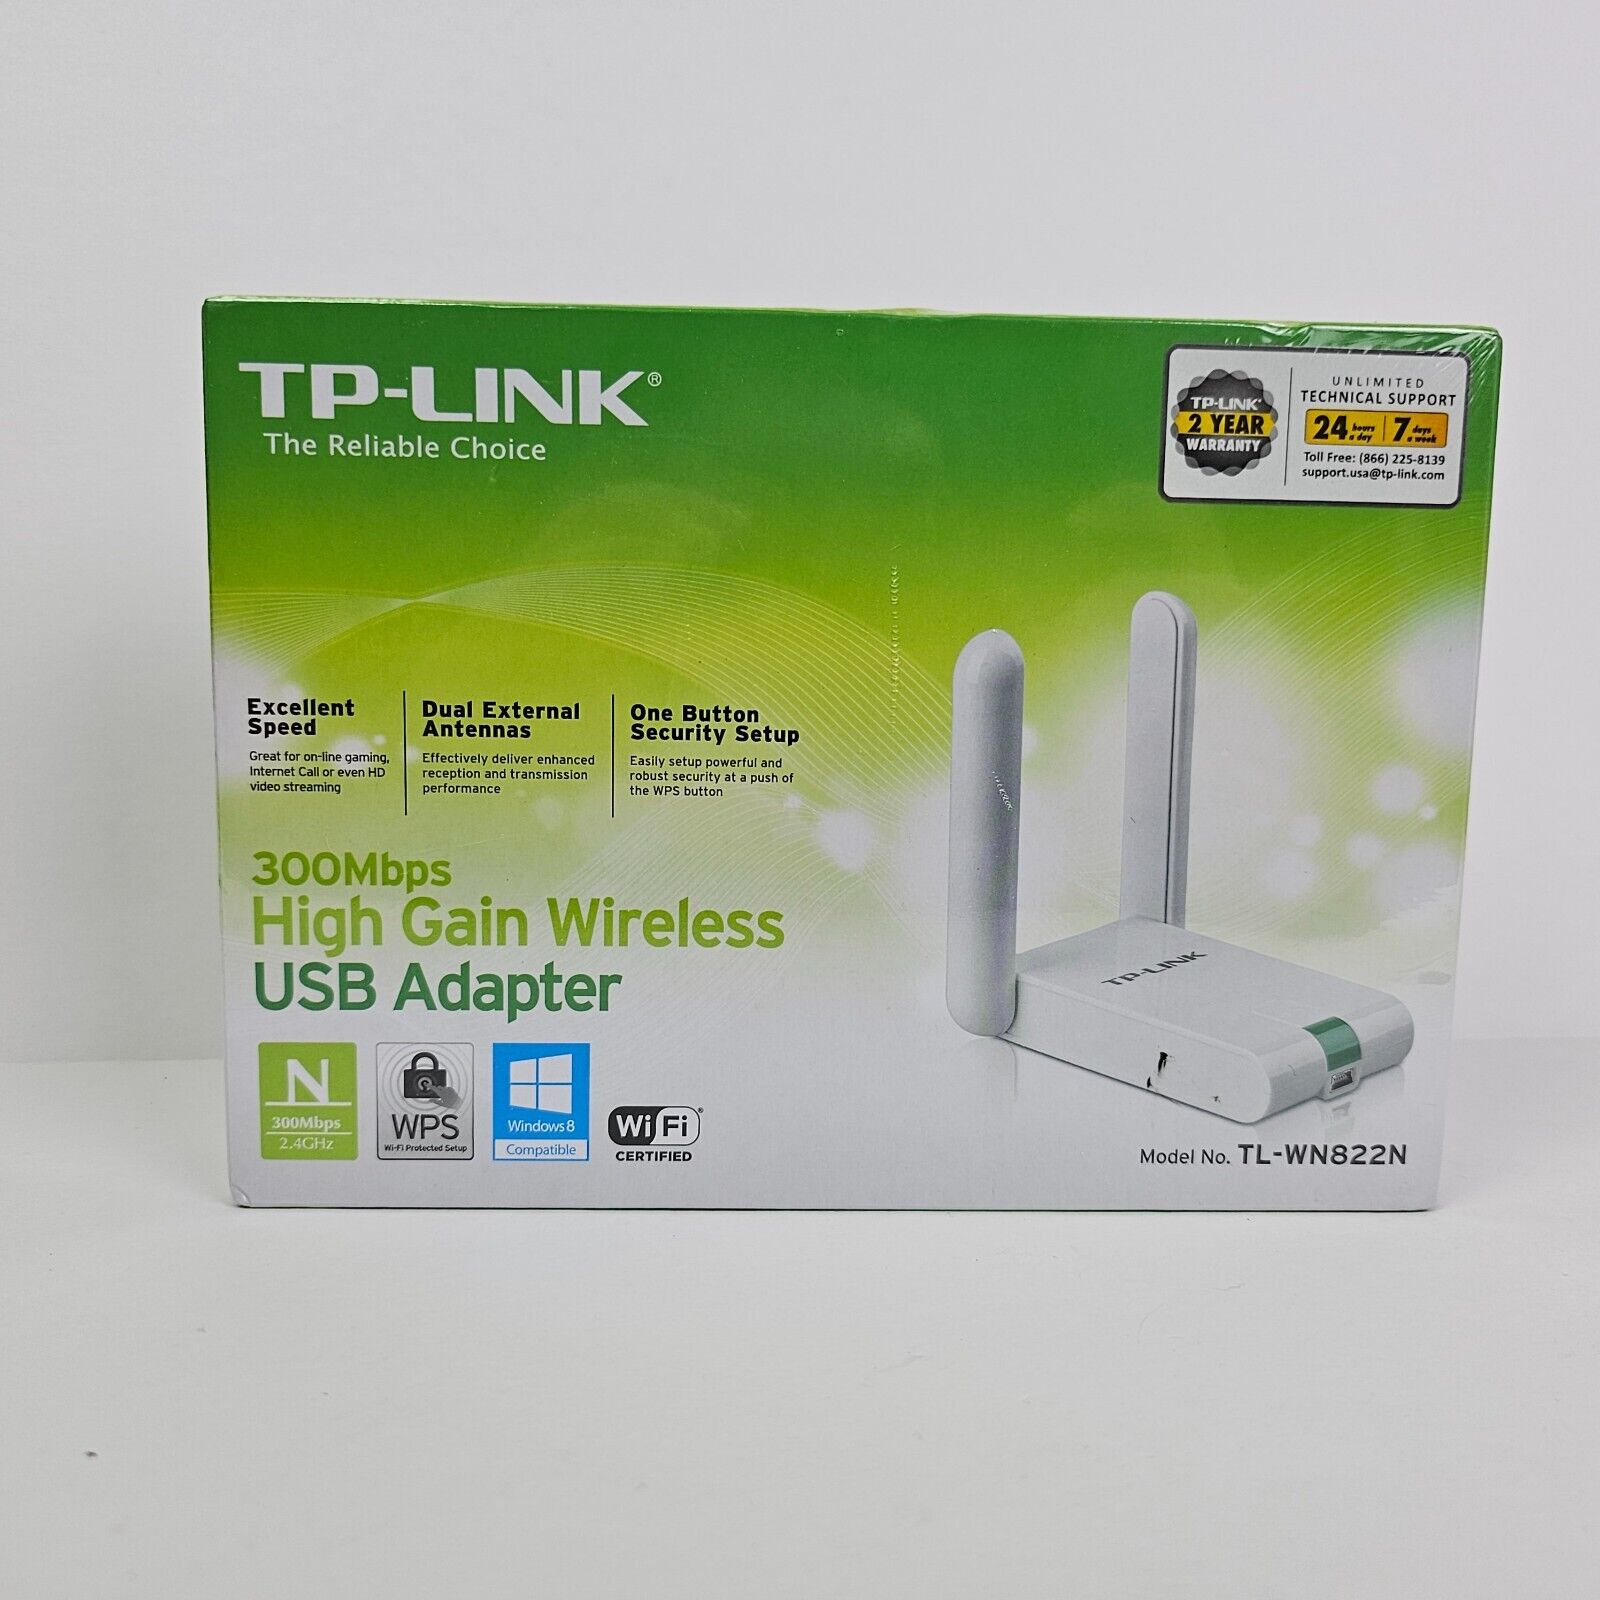 New Sealed TP-LINK TL-WN822N 300Mbps HIGH GAIN WIRELESS USB ADAPTER